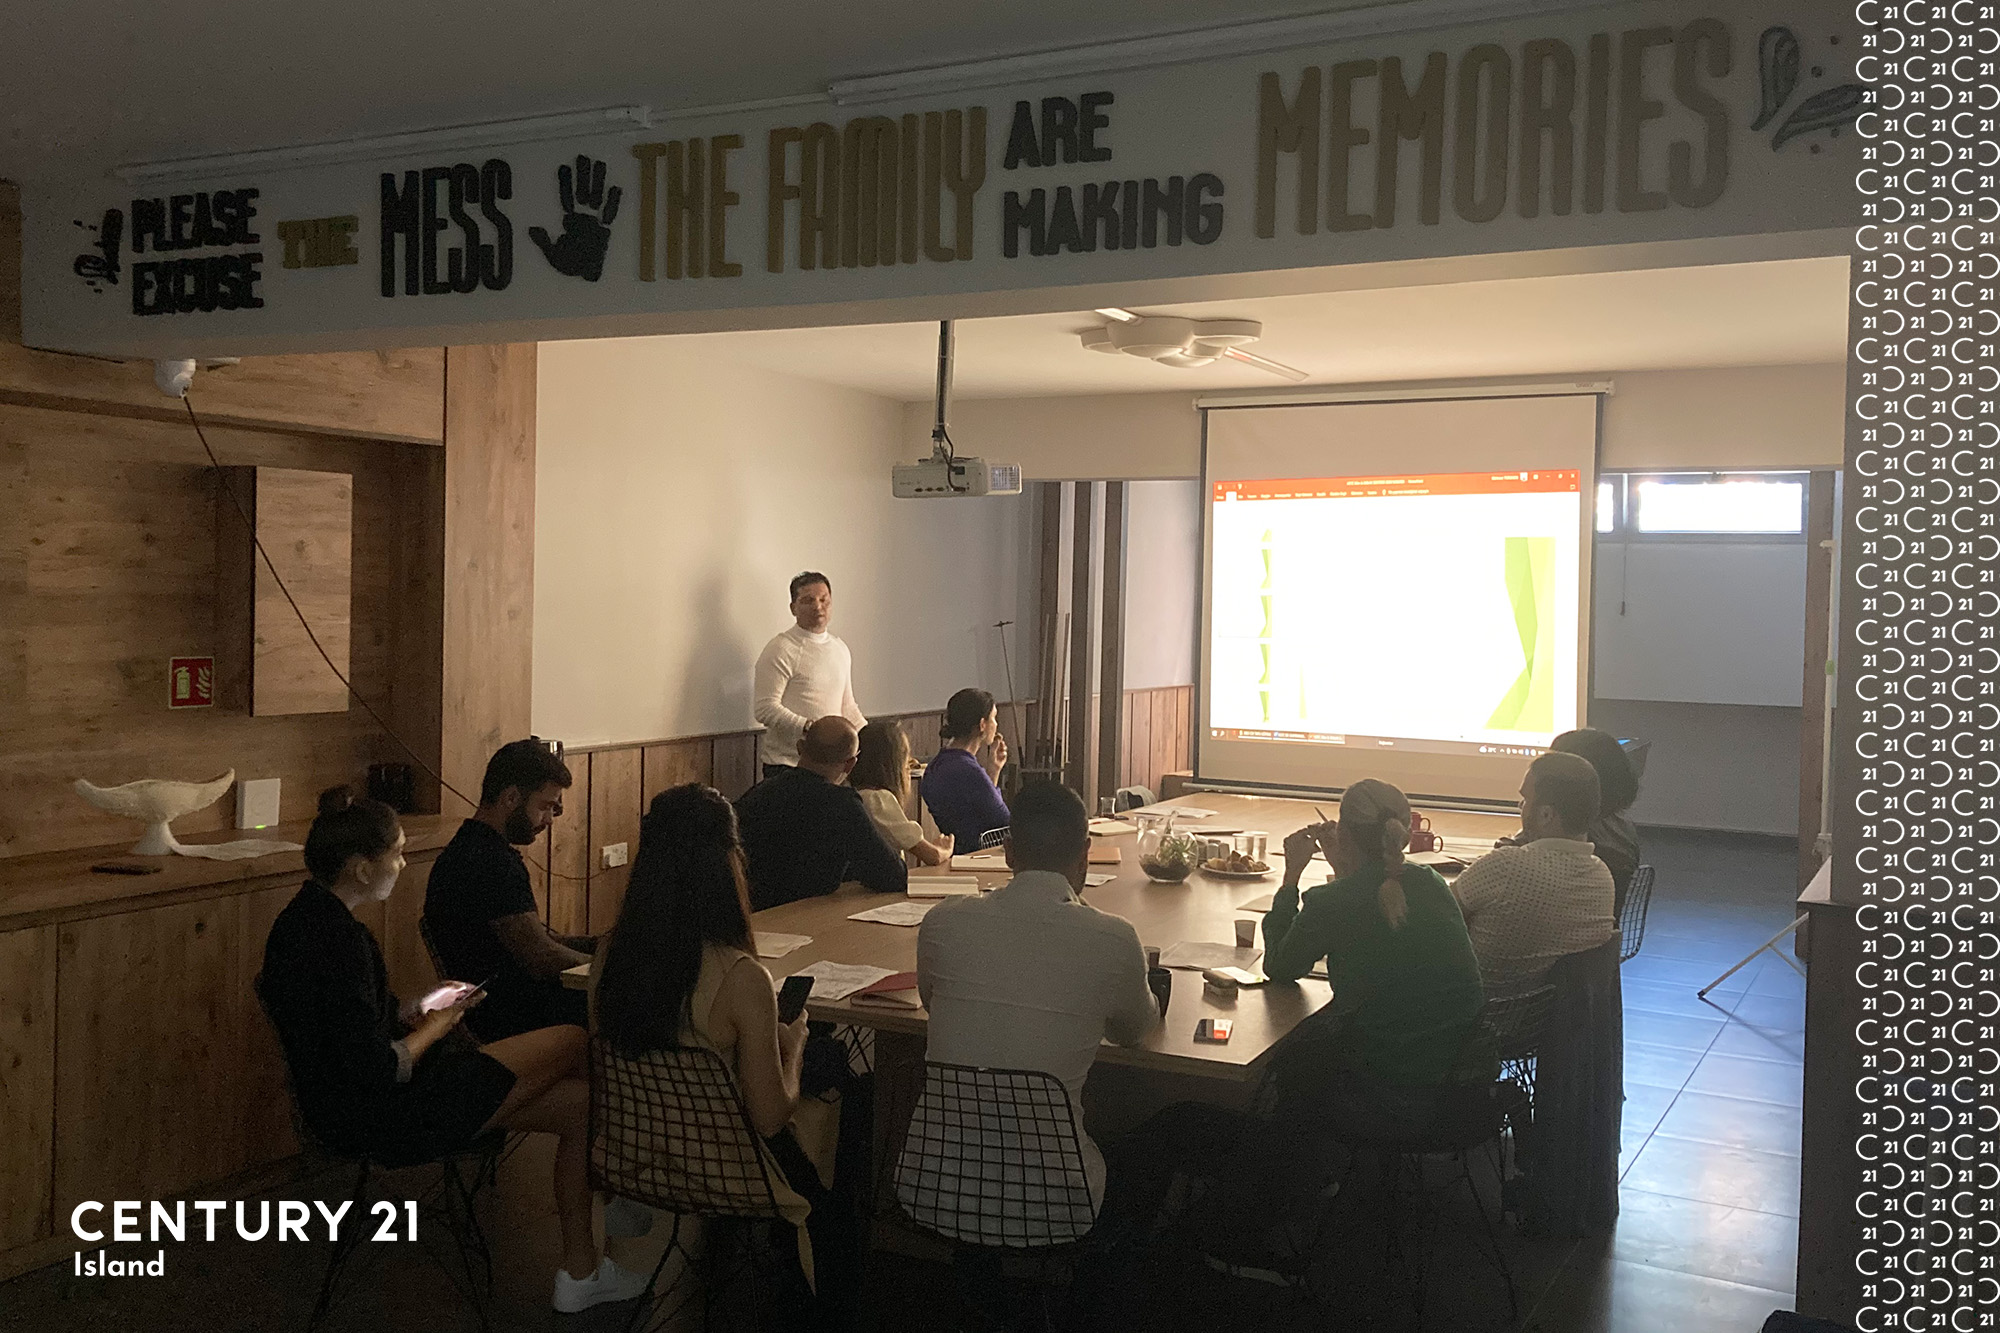 Century 21 Island Team Received Land Registry Literacy Training with Up-to-Date Information